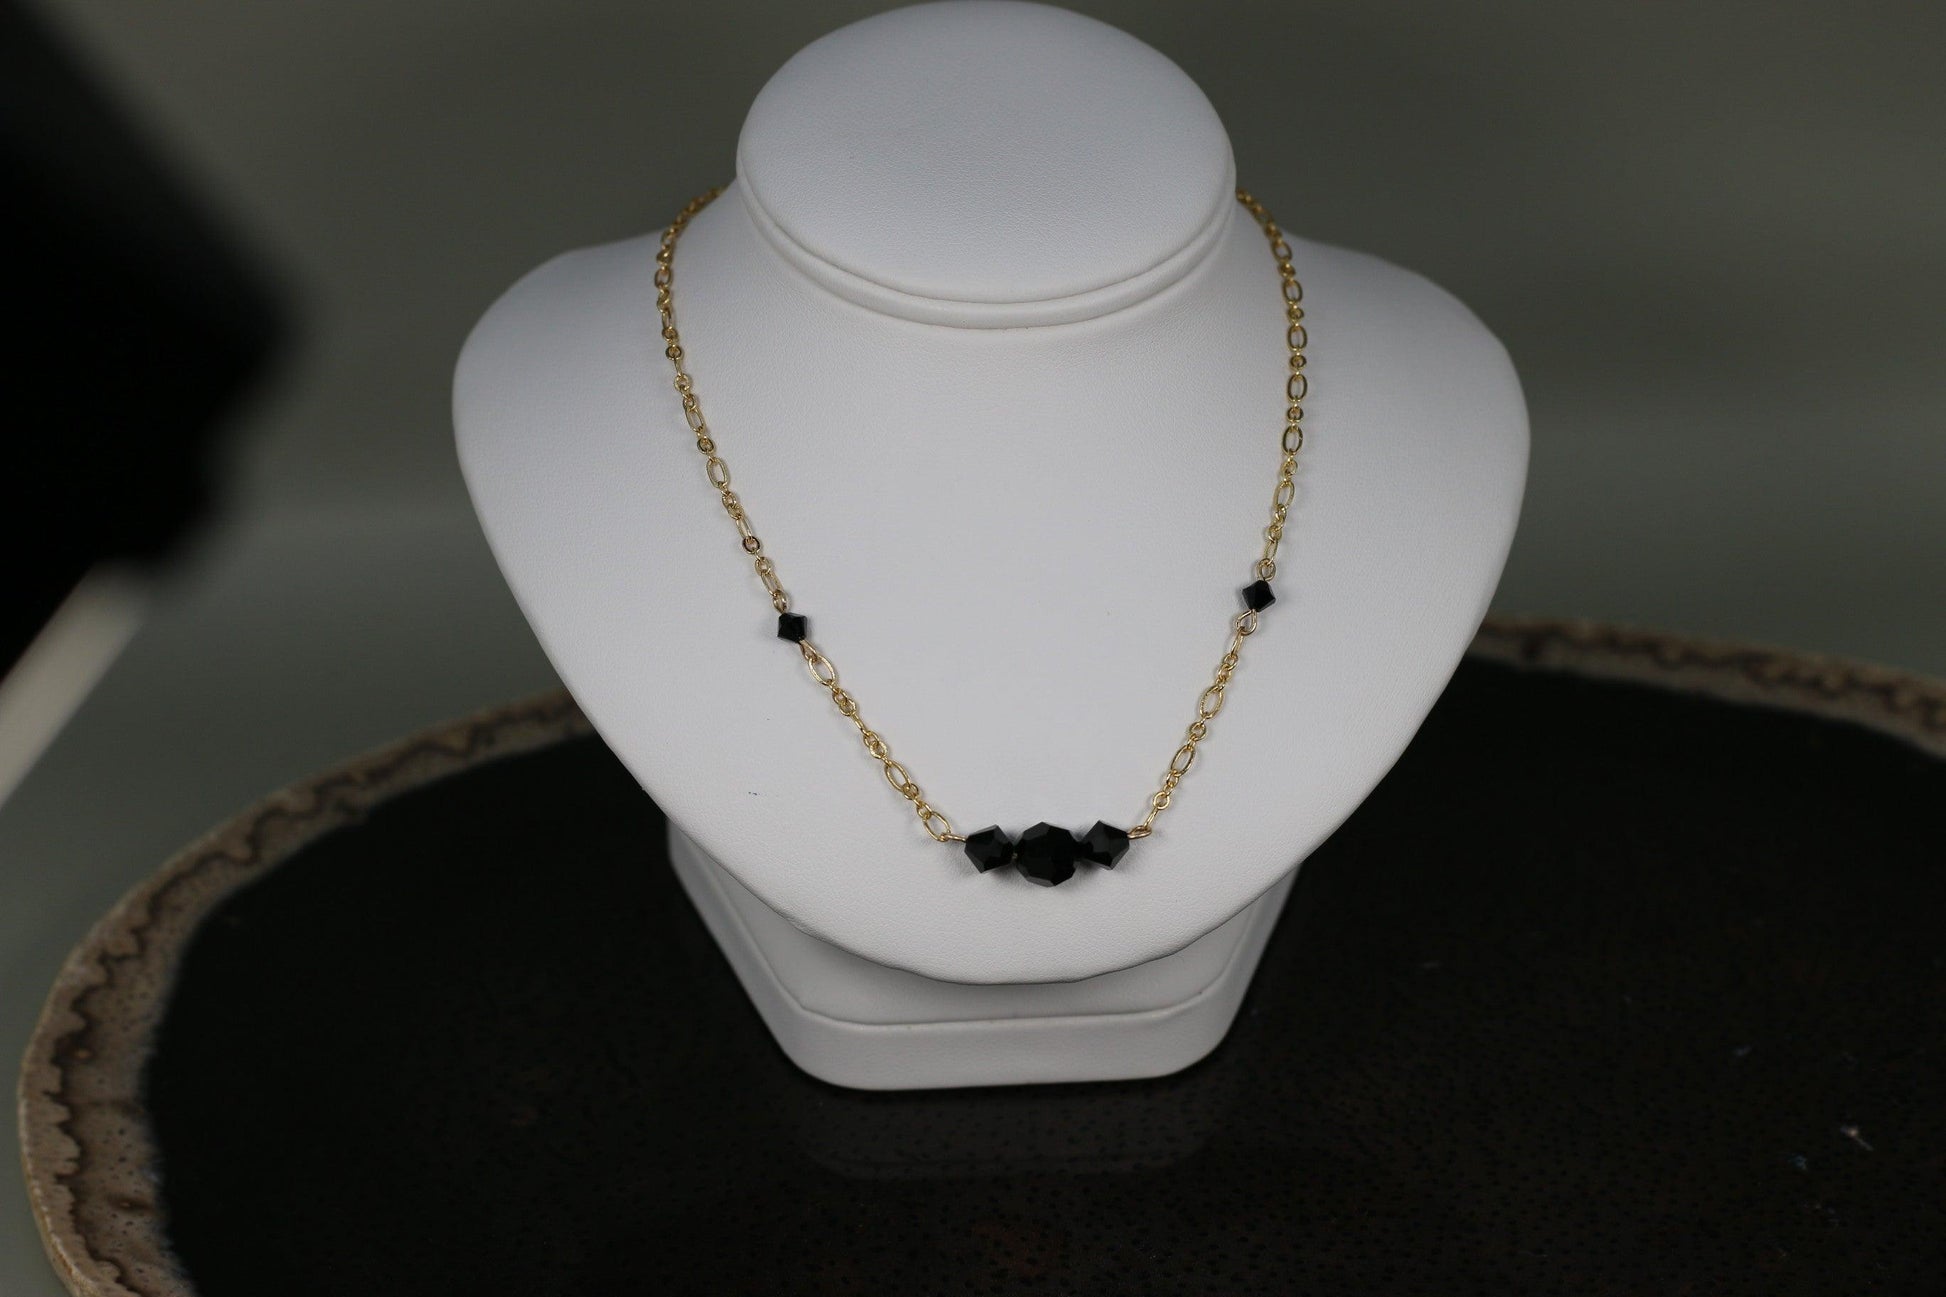 Jet Black Austrian Crystals with Gold Filled Components - Annabel's Jewelry & Leather